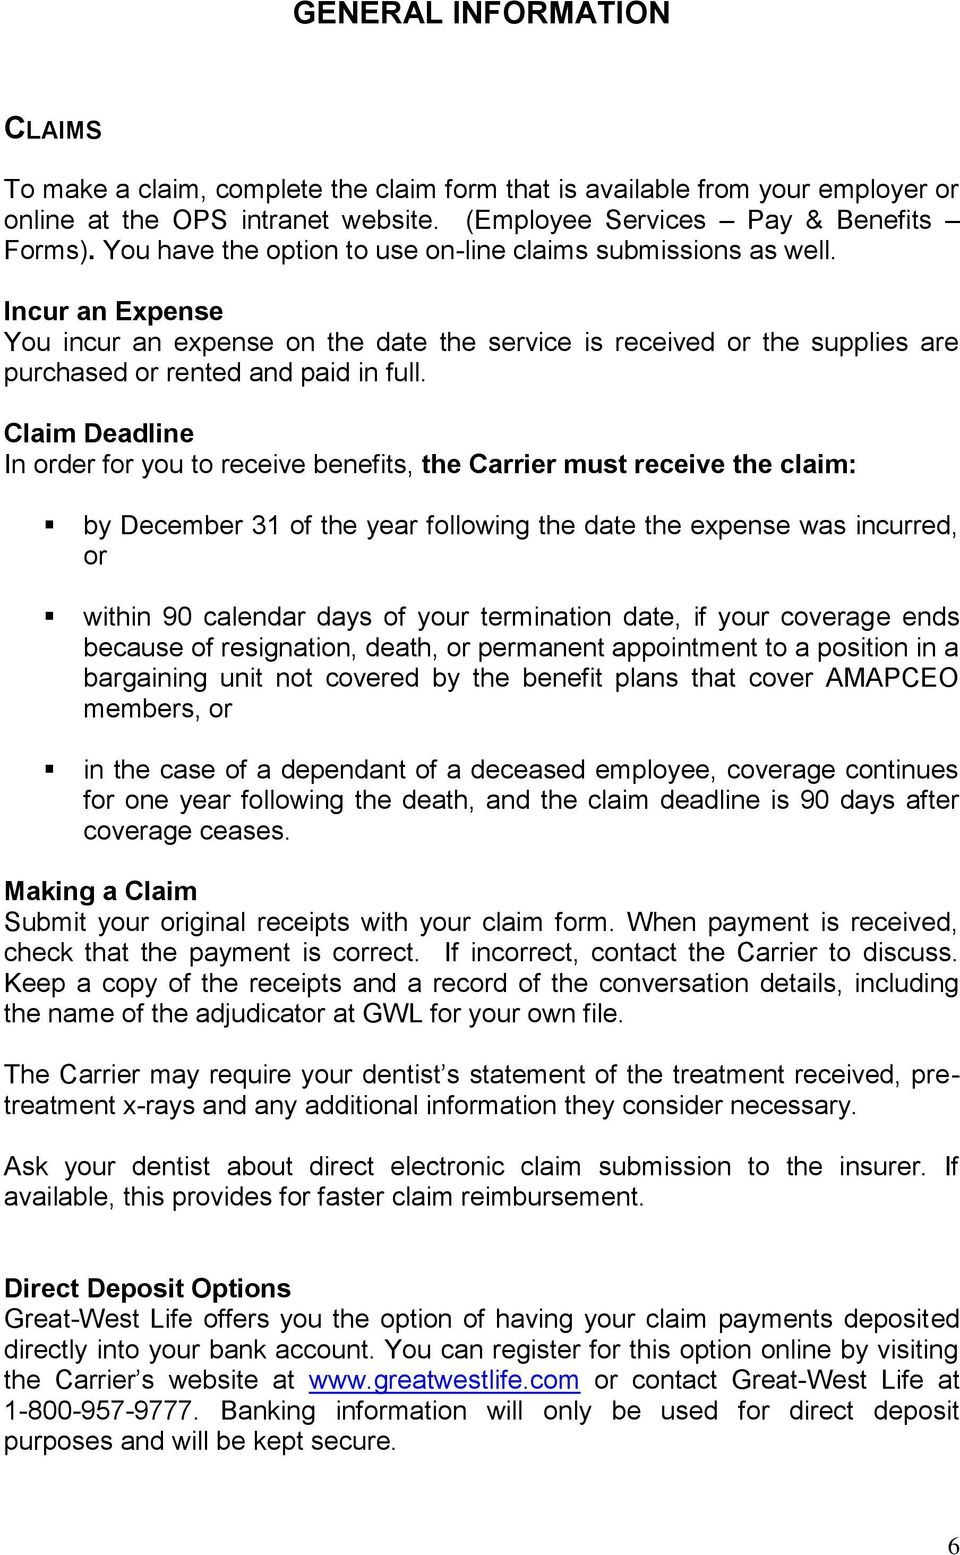 Claim Deadline In order for you to receive benefits, the Carrier must receive the claim: by December 31 of the year following the date the expense was incurred, or within 90 calendar days of your